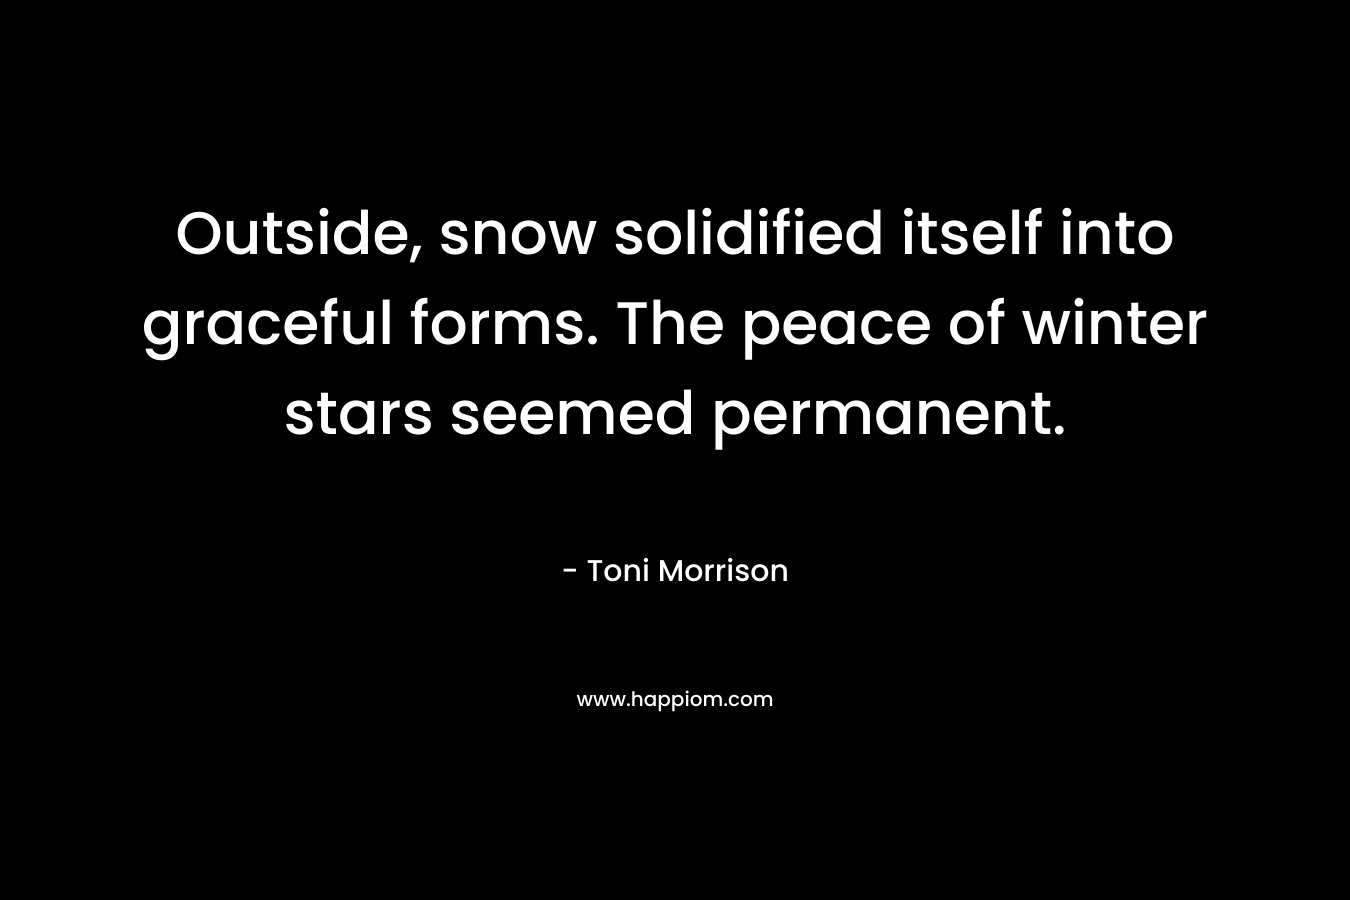 Outside, snow solidified itself into graceful forms. The peace of winter stars seemed permanent.